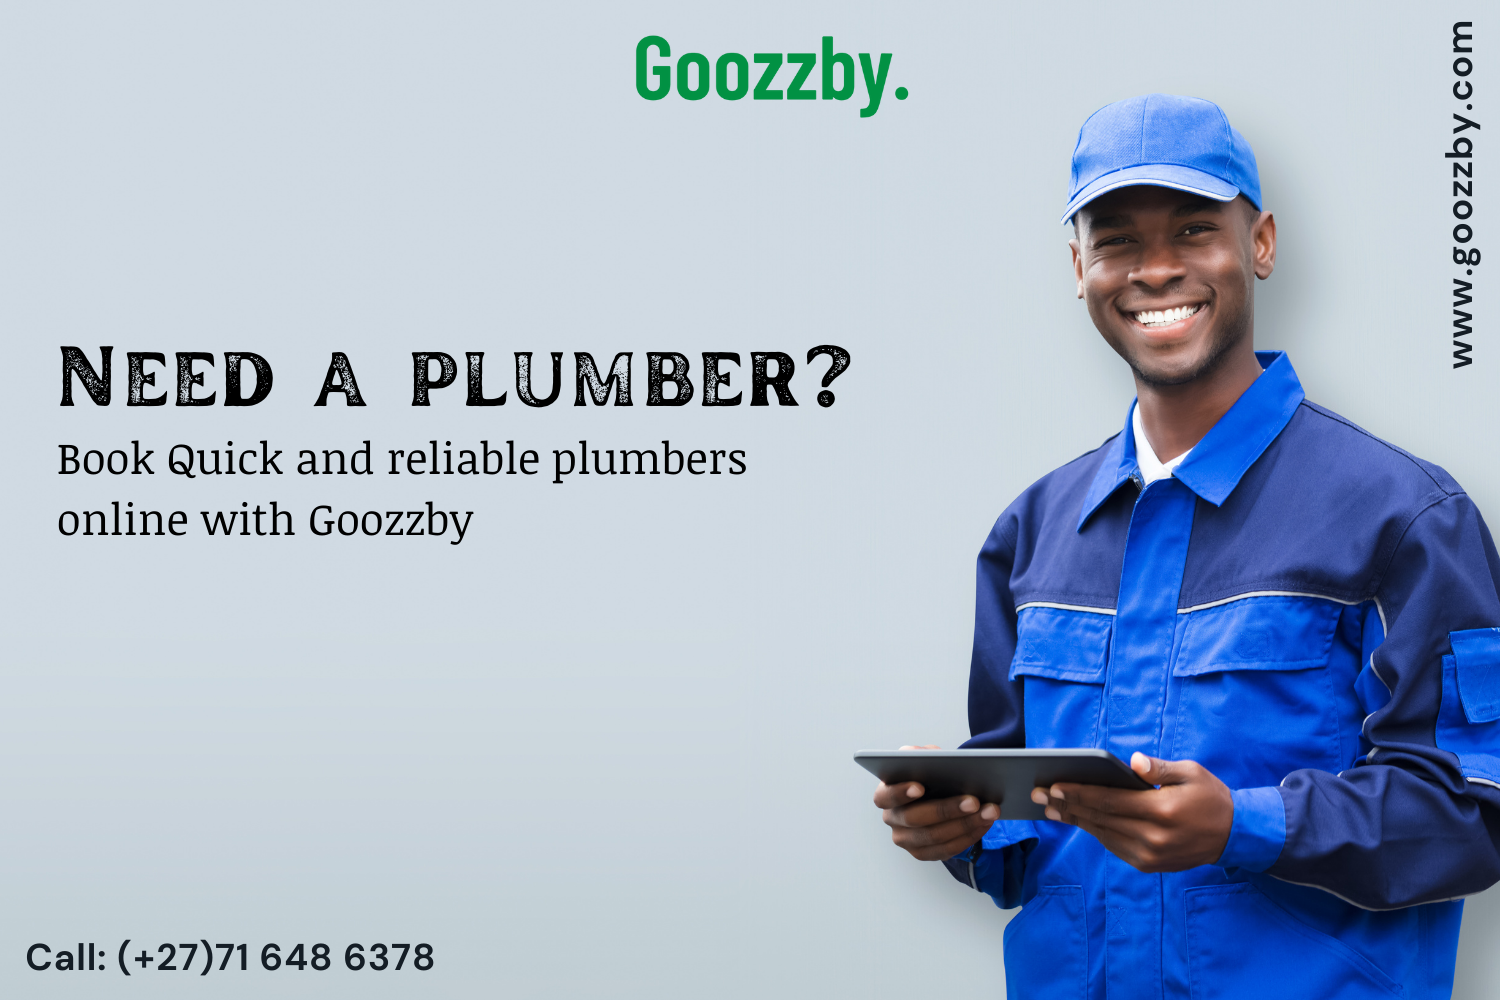 Goozzby.

www.goozzby.com

  

NEED A PLUMBER?

Book Quick and reliable plumbers
online with Goozzby

Call: (+27)71 648 6378